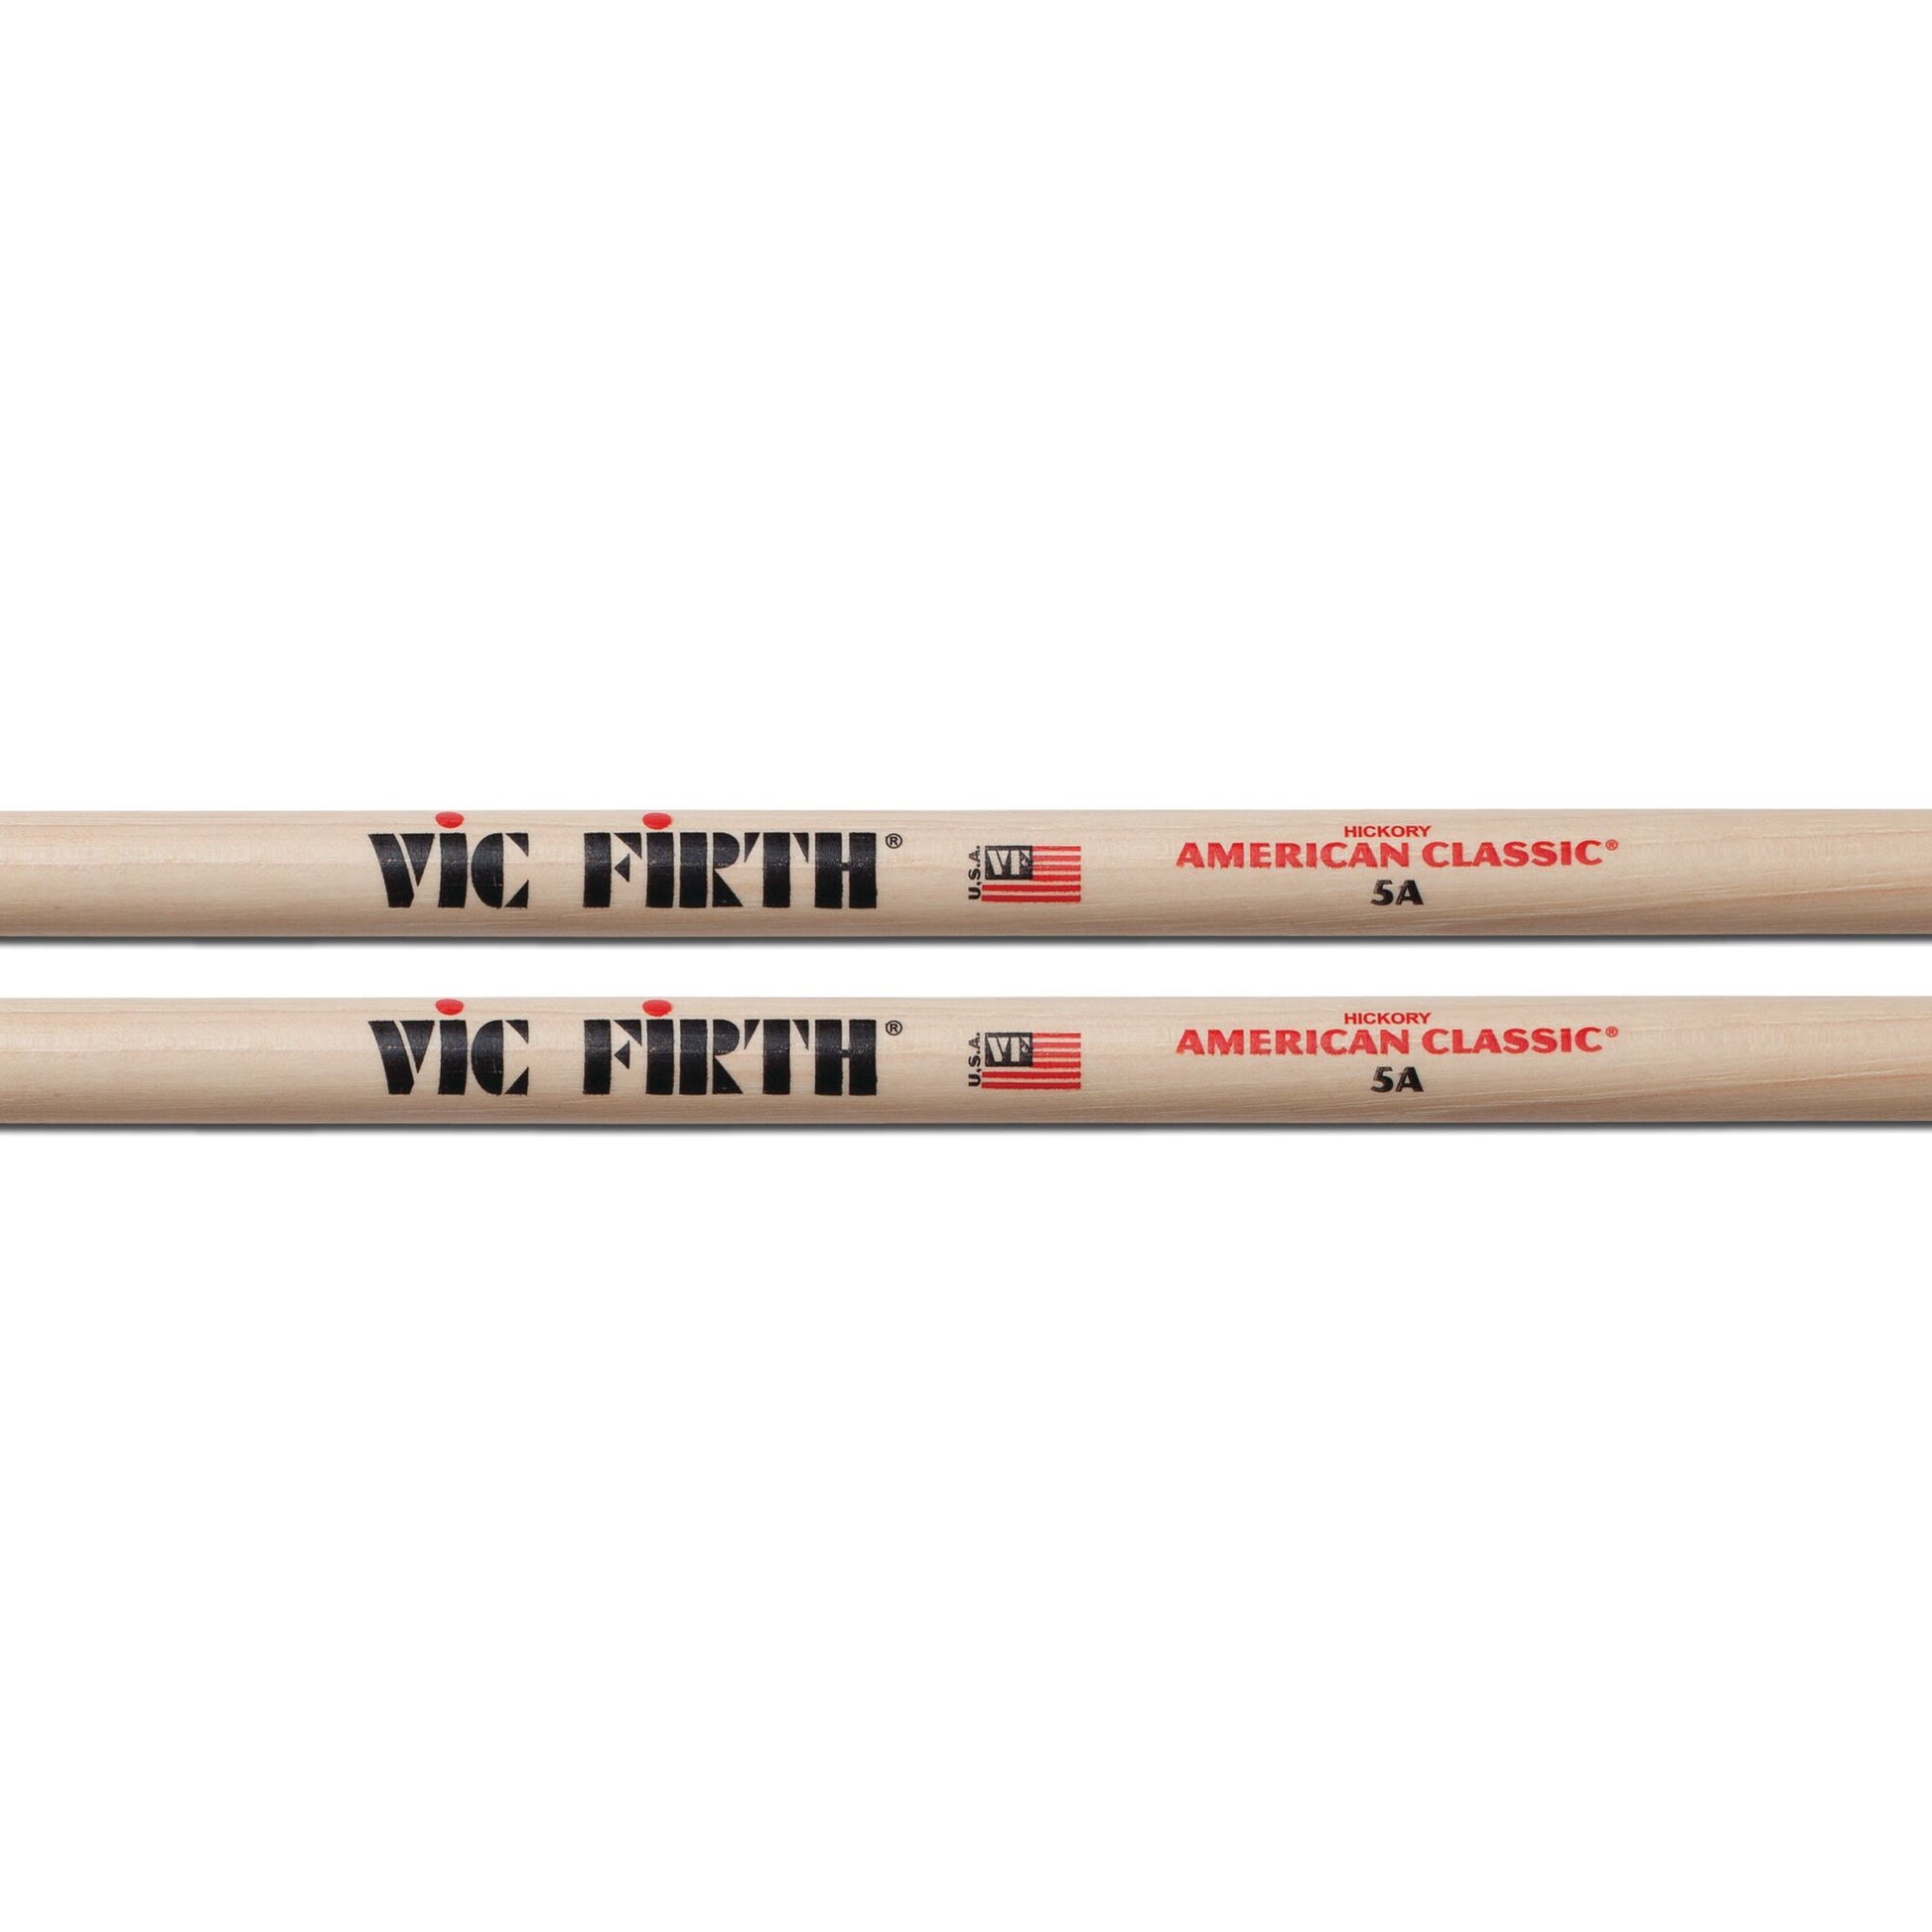 Vic Firth American Classic 5A Drumsticks Value Pack